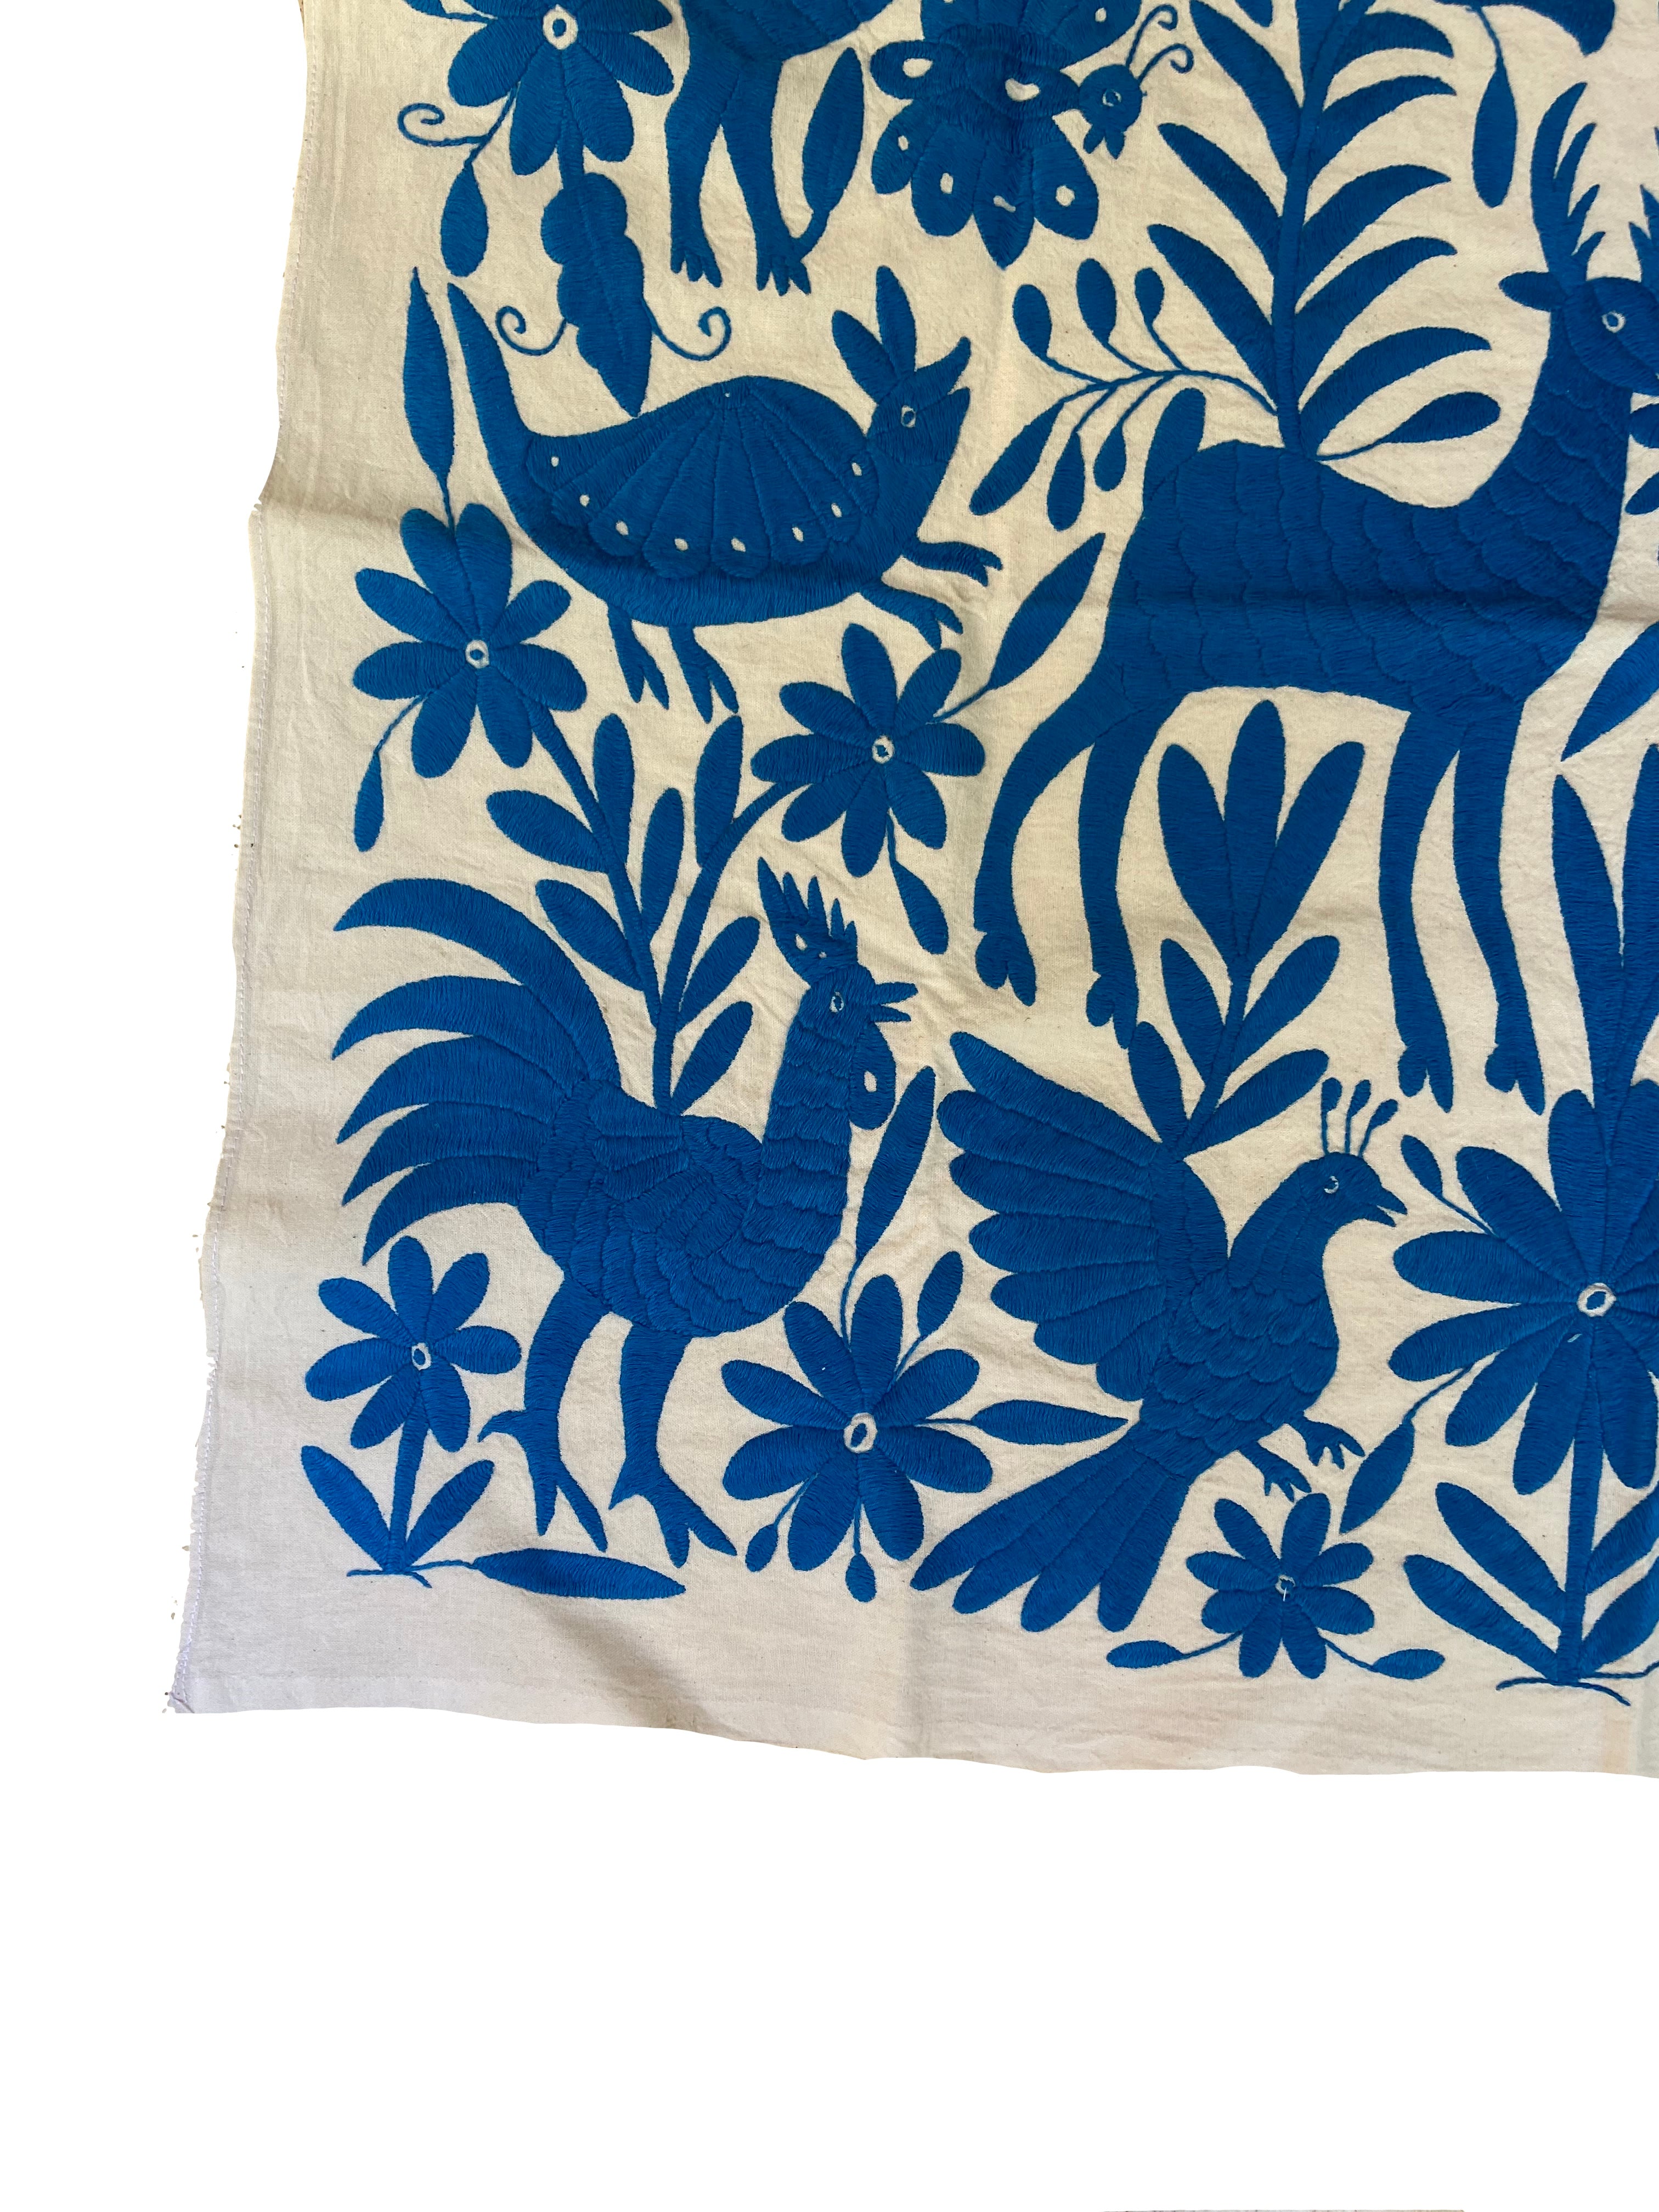 OTOMI blue tapestry/ Wall hanging